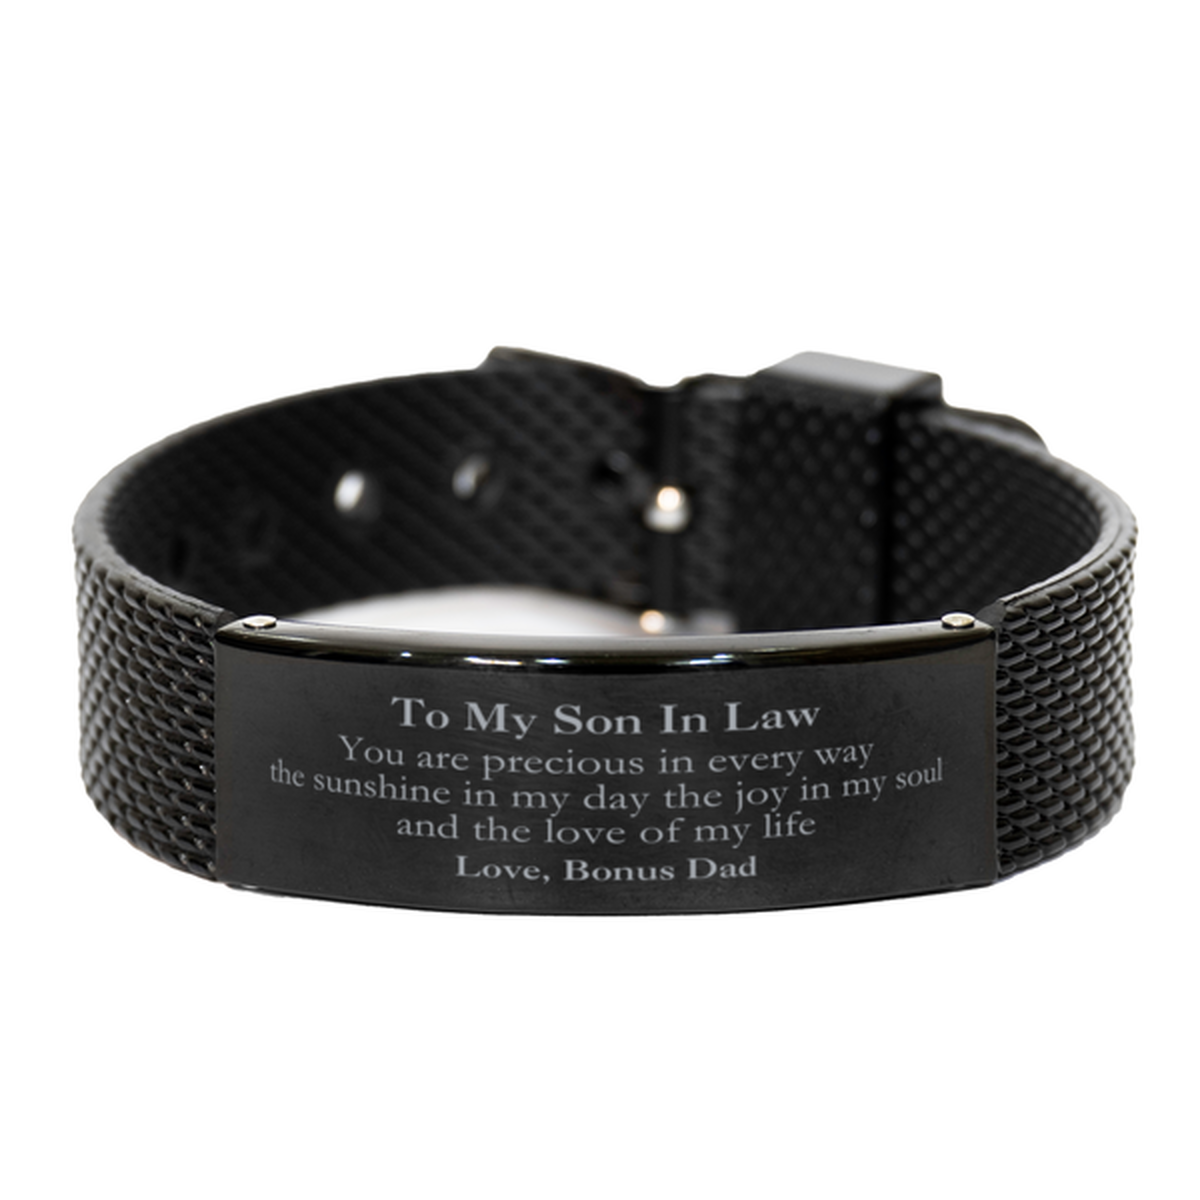 Graduation Gifts for Son In Law Black Shark Mesh Bracelet Present from Bonus Dad, Christmas Son In Law Birthday Gifts Son In Law You are precious in every way the sunshine in my day. Love, Bonus Dad